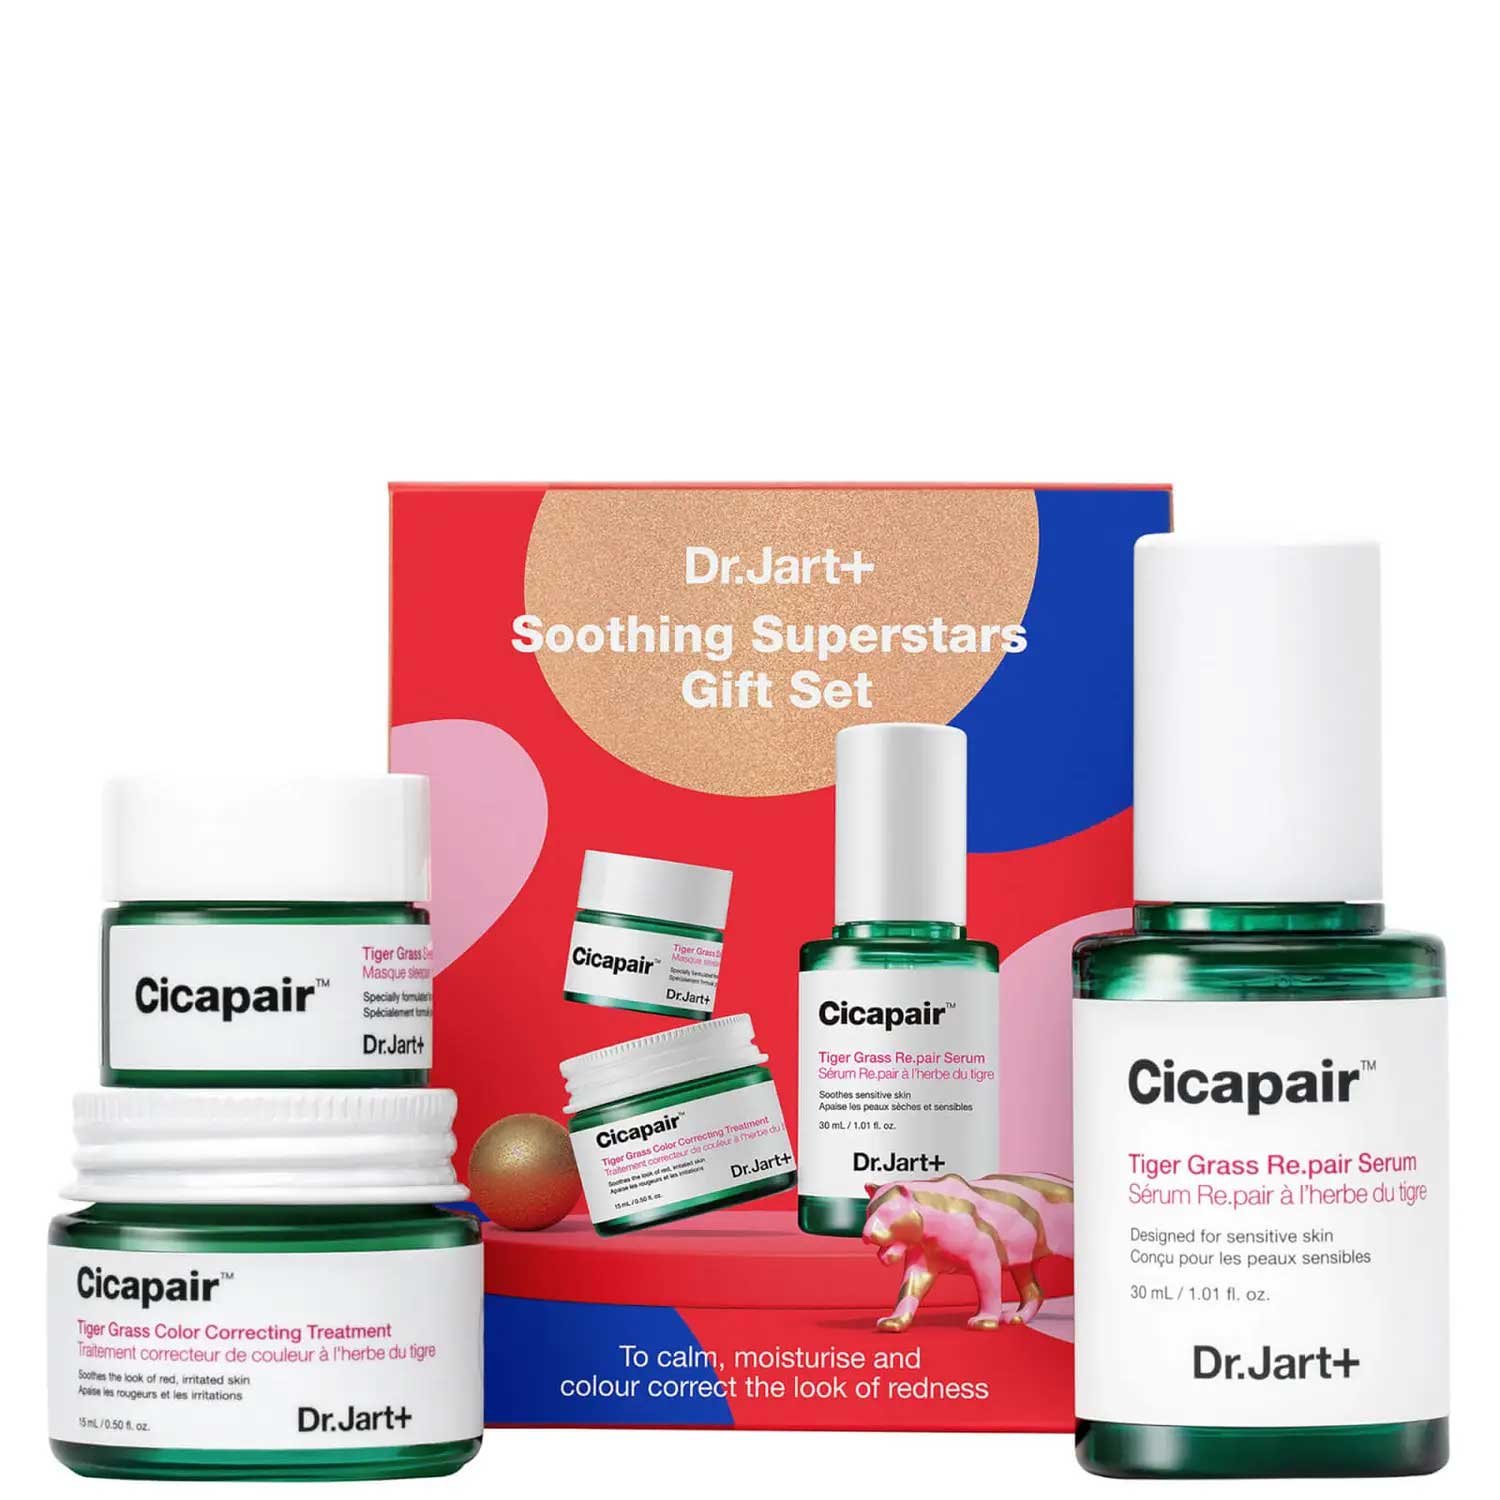 gifts for her with shoppable links - Dr.Jart+ Soothing Superstars Gift Set: A Perfect Affordable Gift for Any Occasion